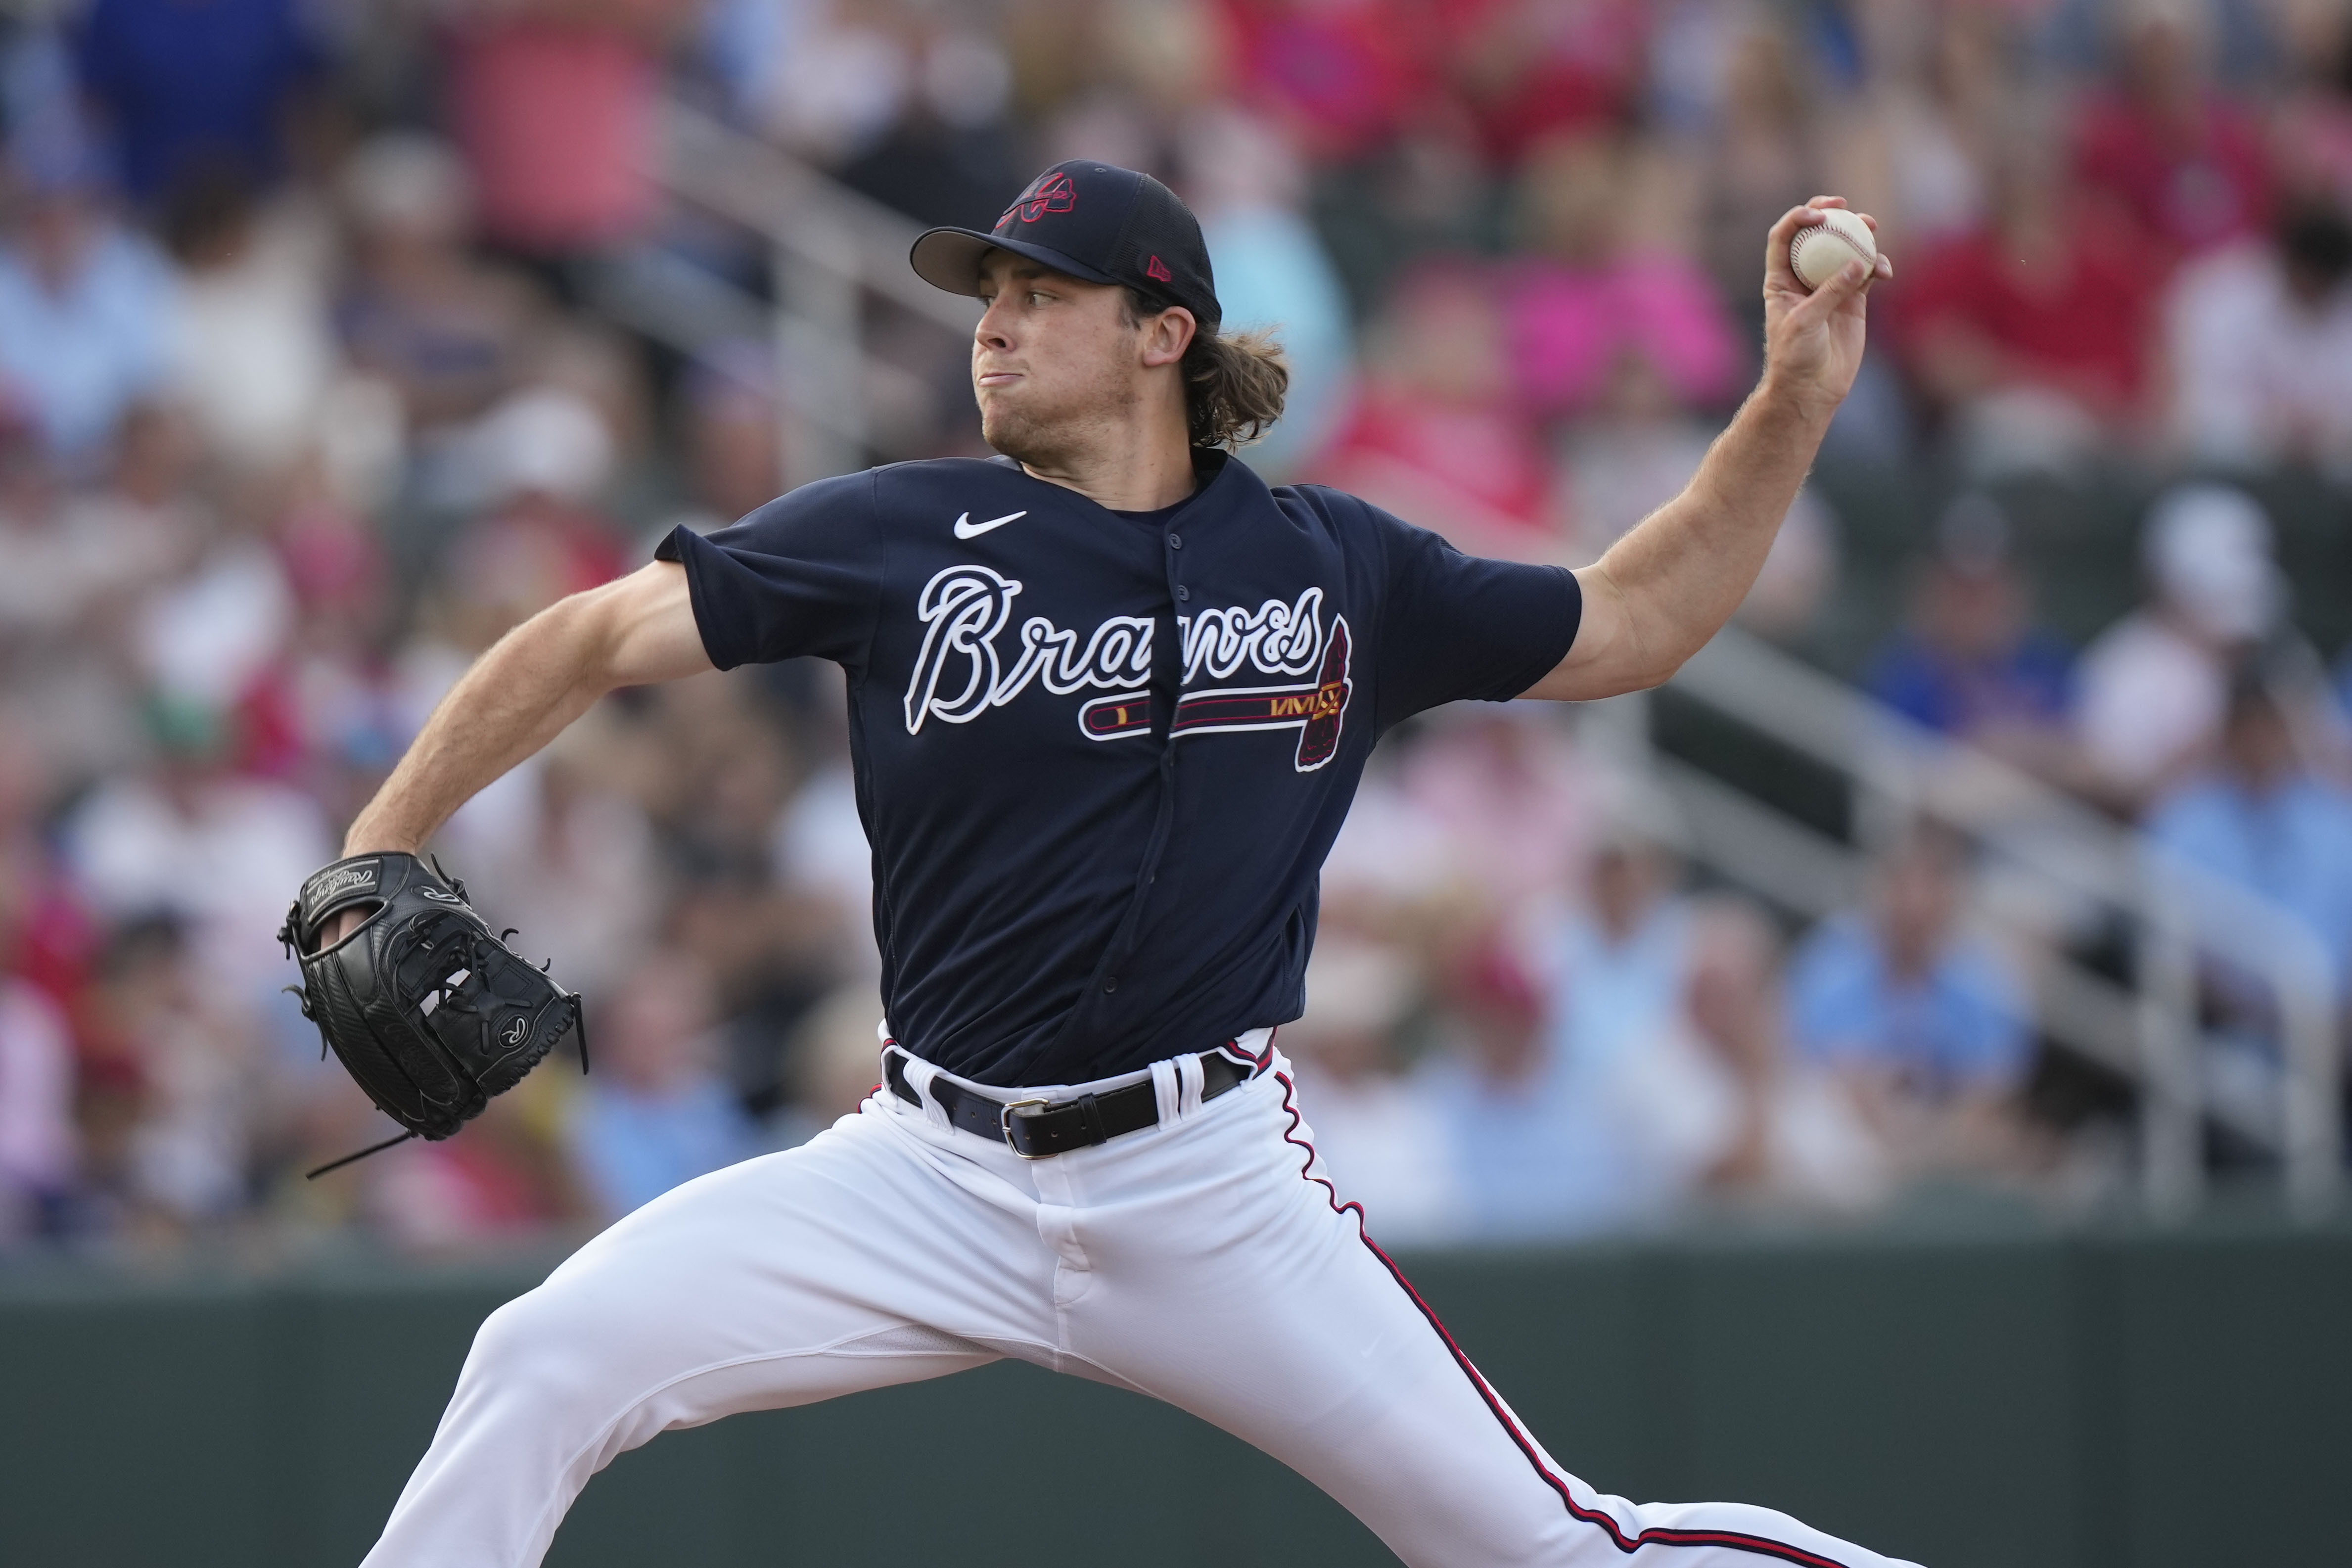 Braves rookies get rotation spots with Wright headed to IL